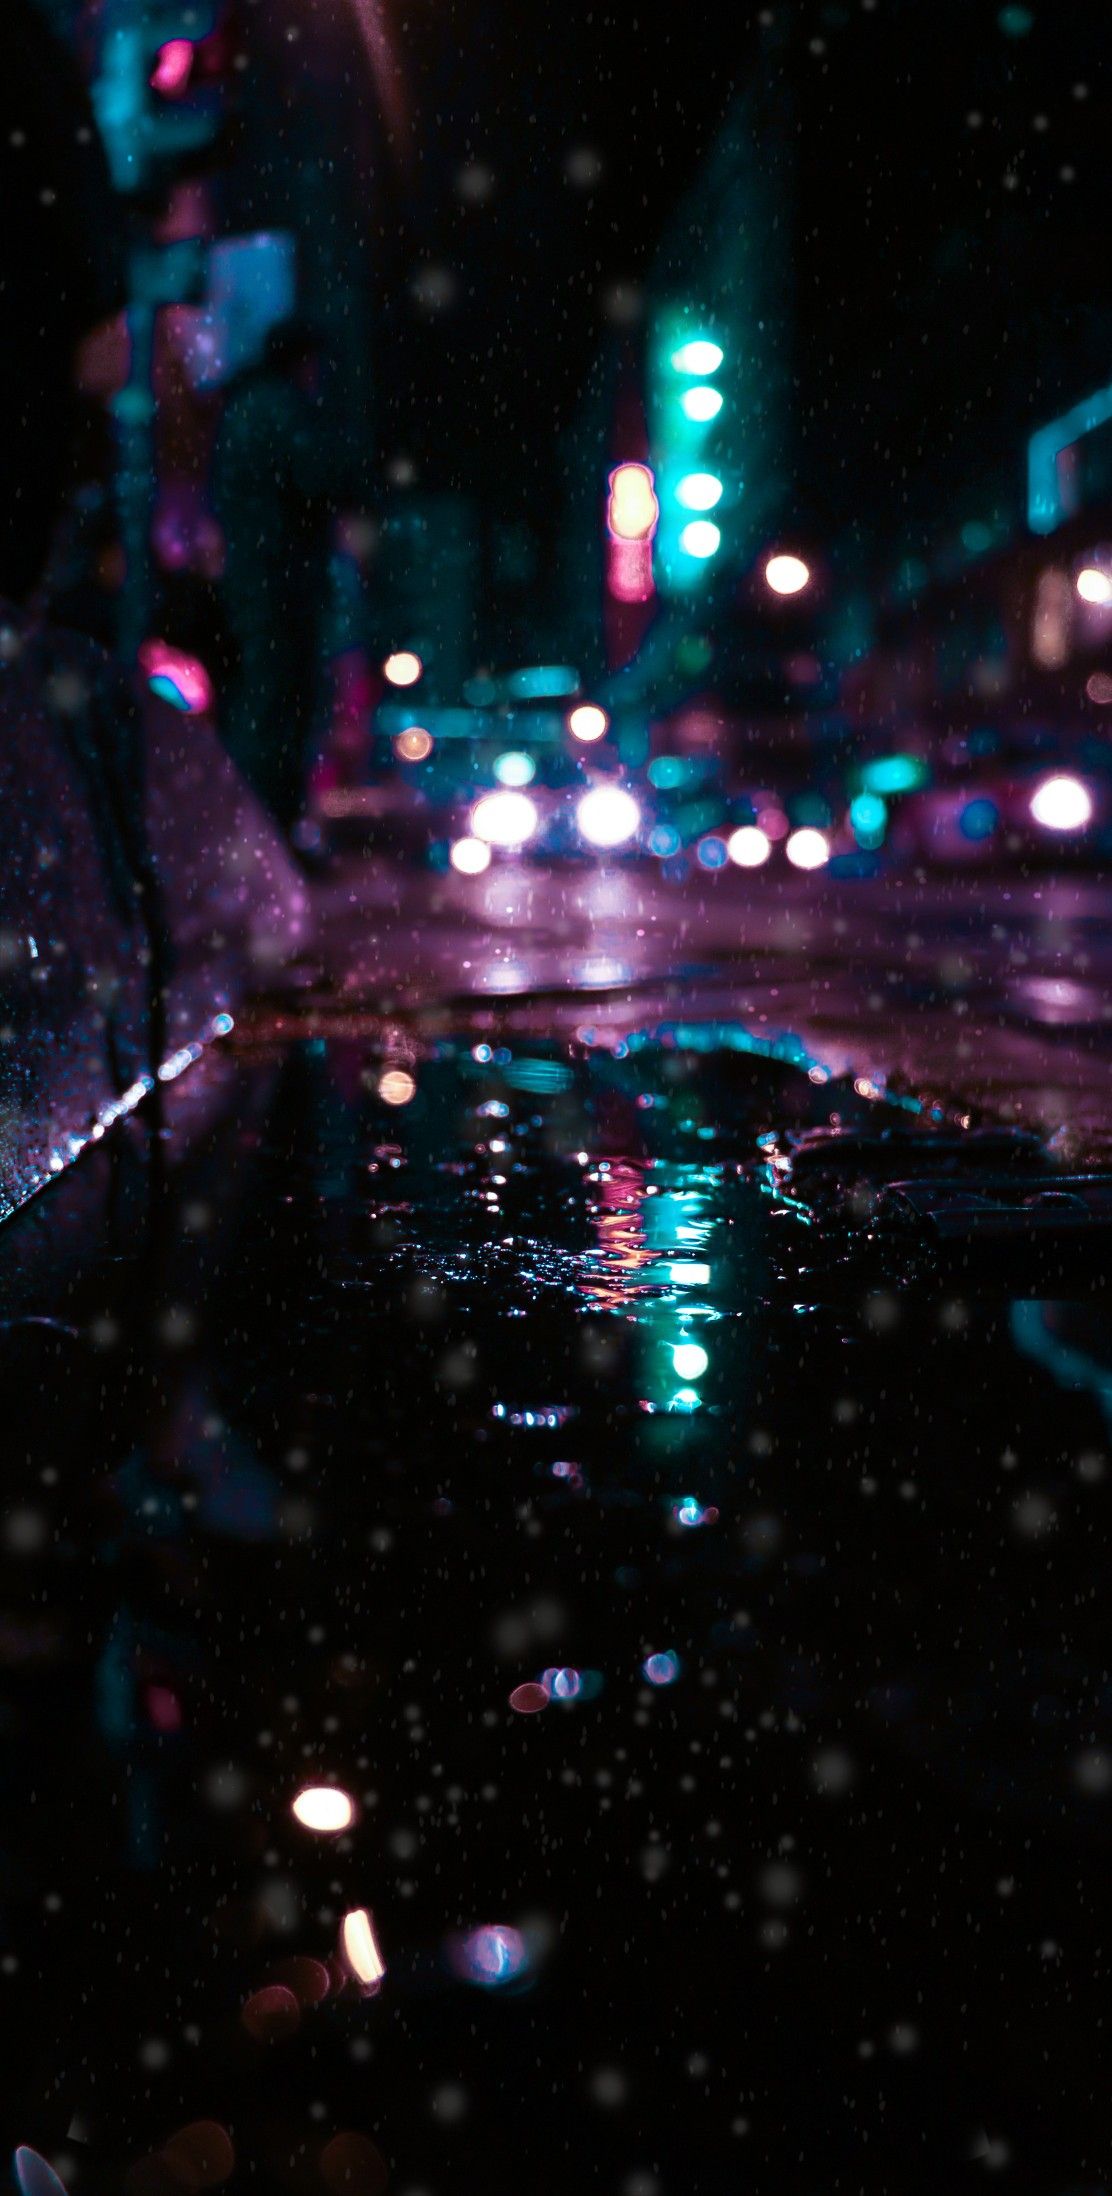 Free download k wallpaper follow me with images rainy wallpaper neon x for your desktop mobile tablet explore night aesthetic k wallpapers k night sky wallpaper aesthetic wallpaper